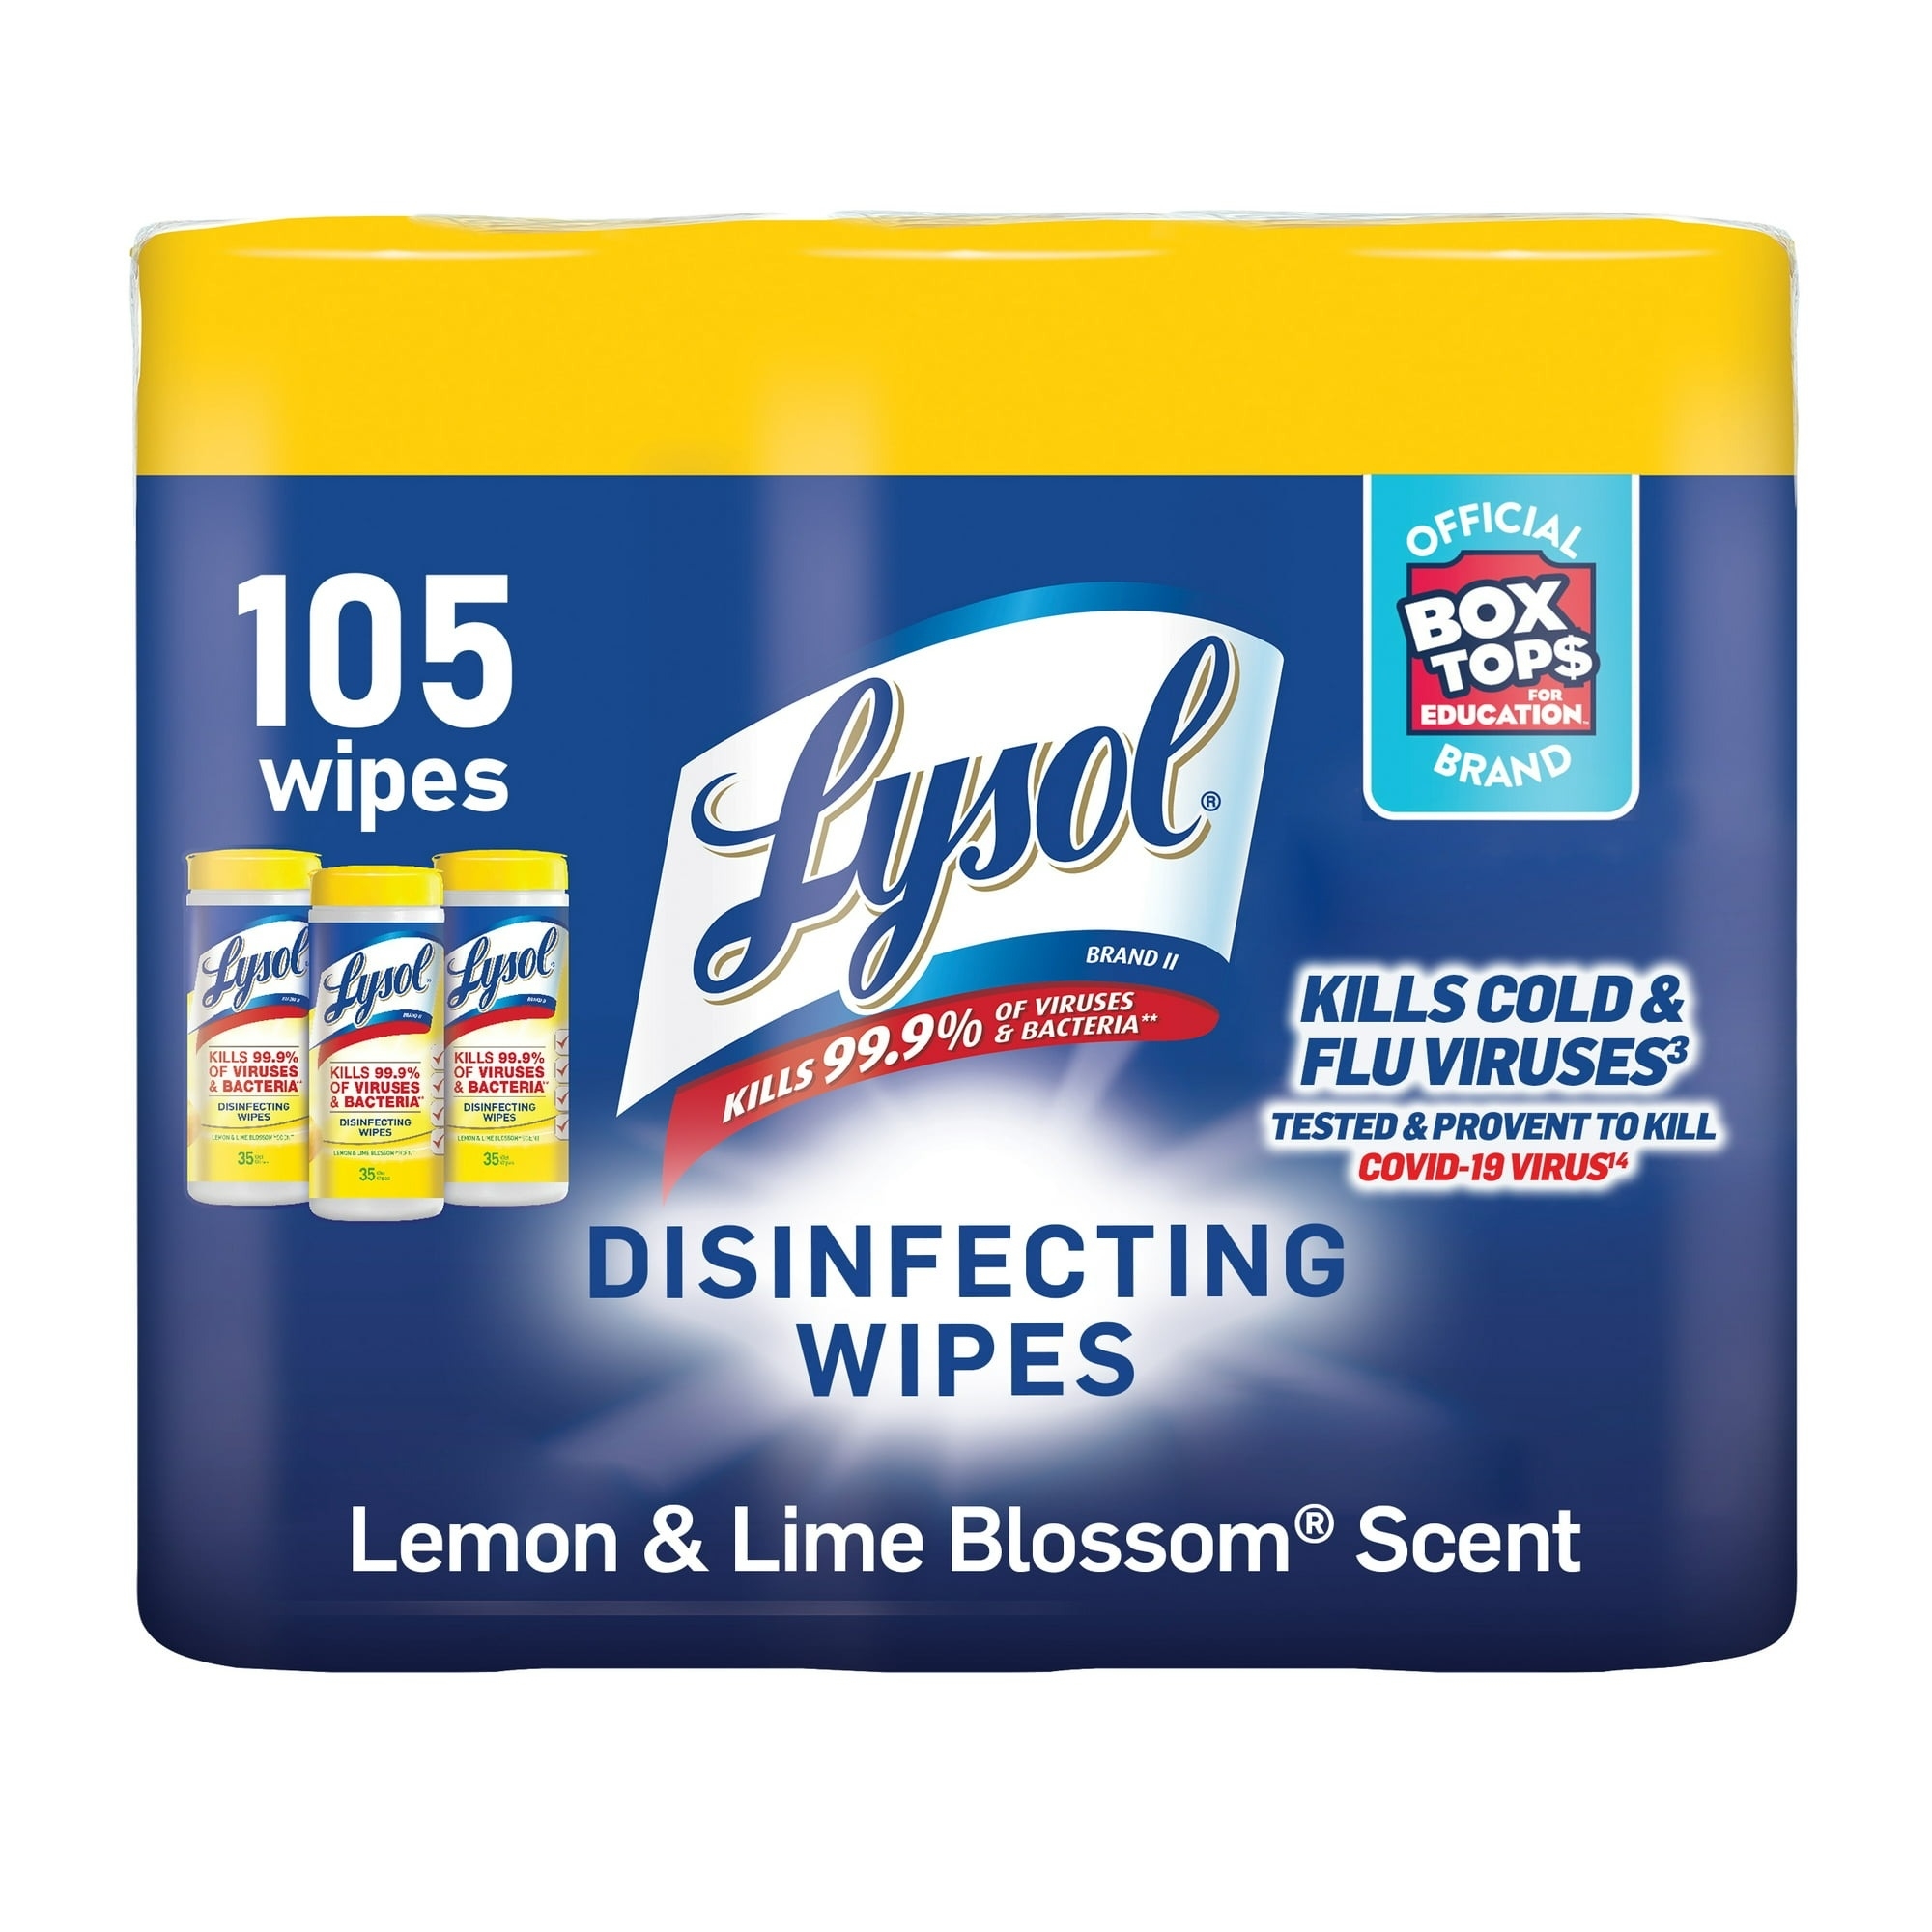 the package of Lysol wipes